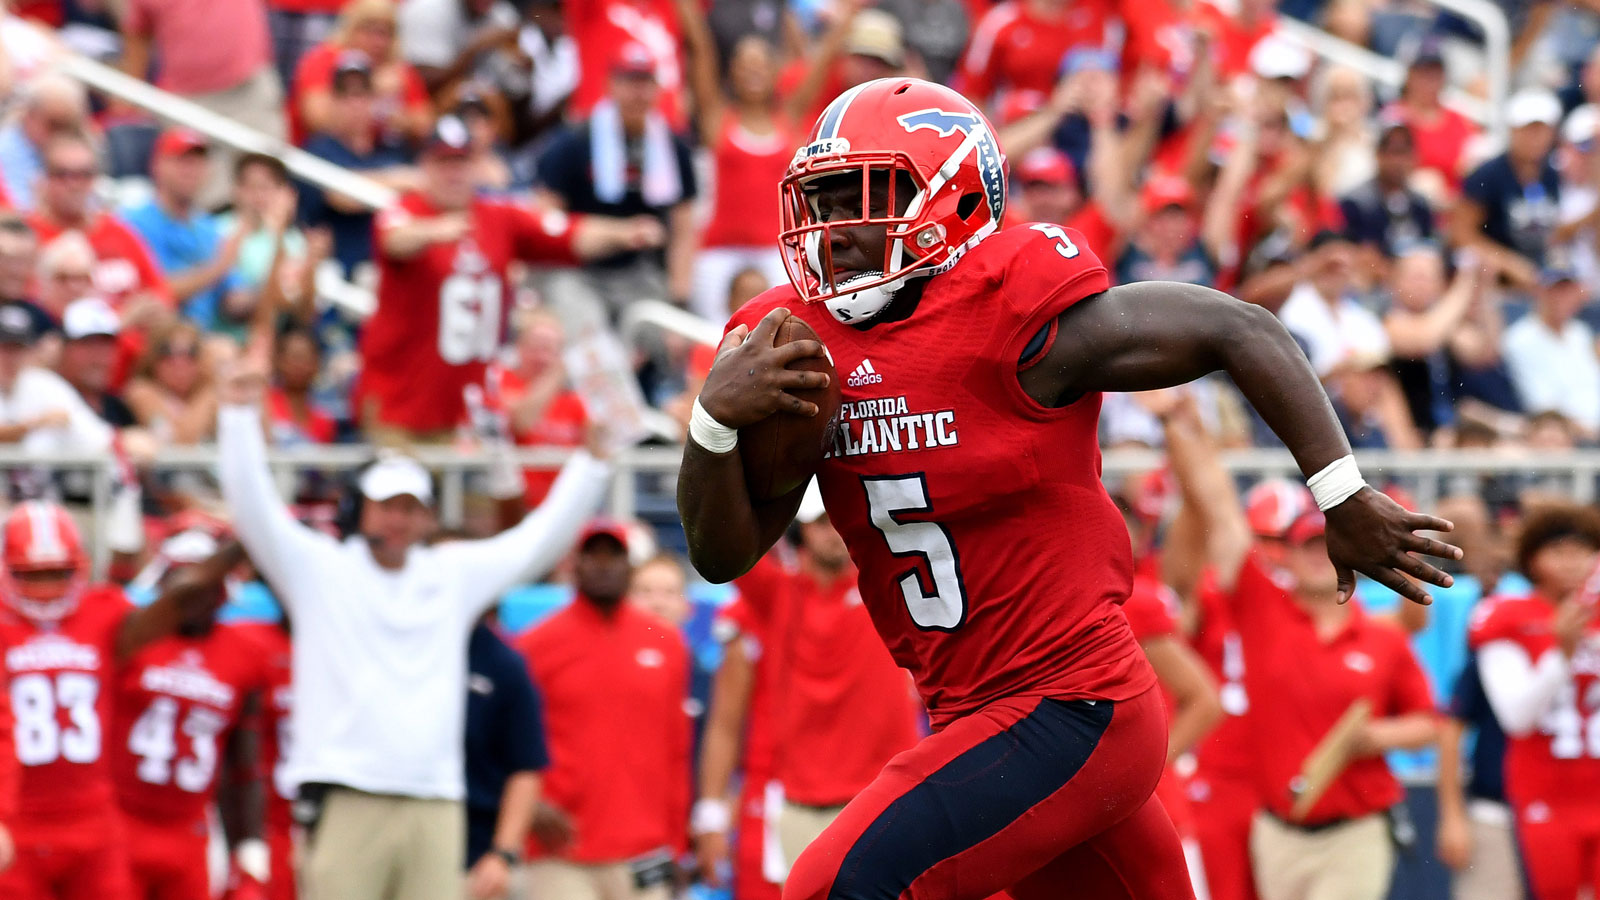 Devin Singletary becomes FAU's all-time career rushing leader in Owls' win over ODU